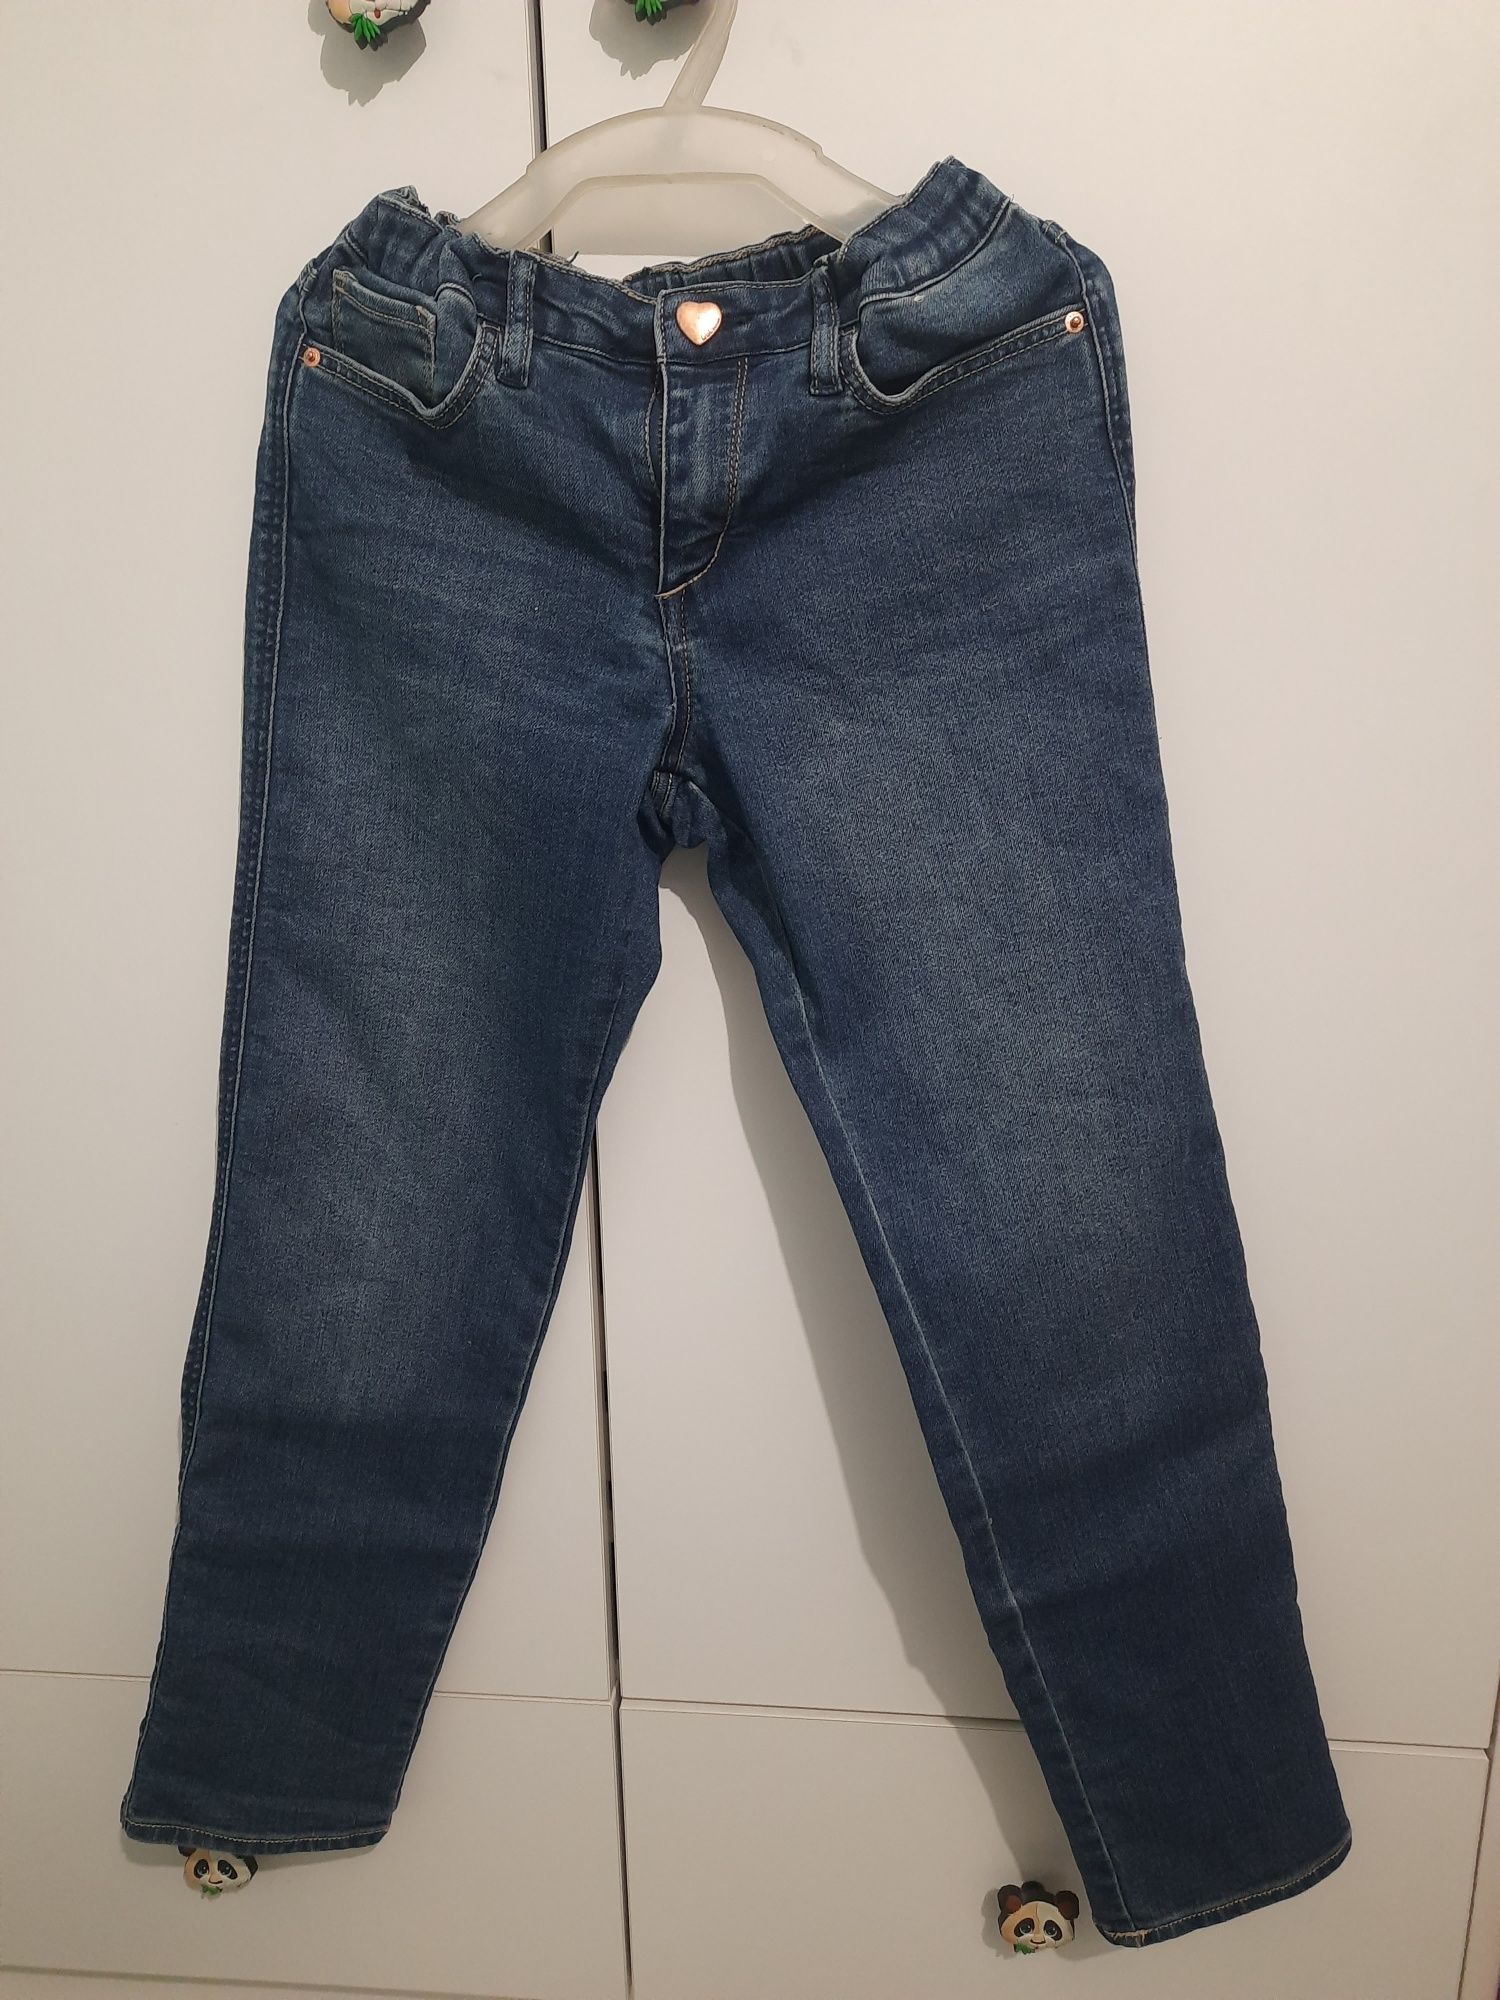 Jeansy H&M r. 134